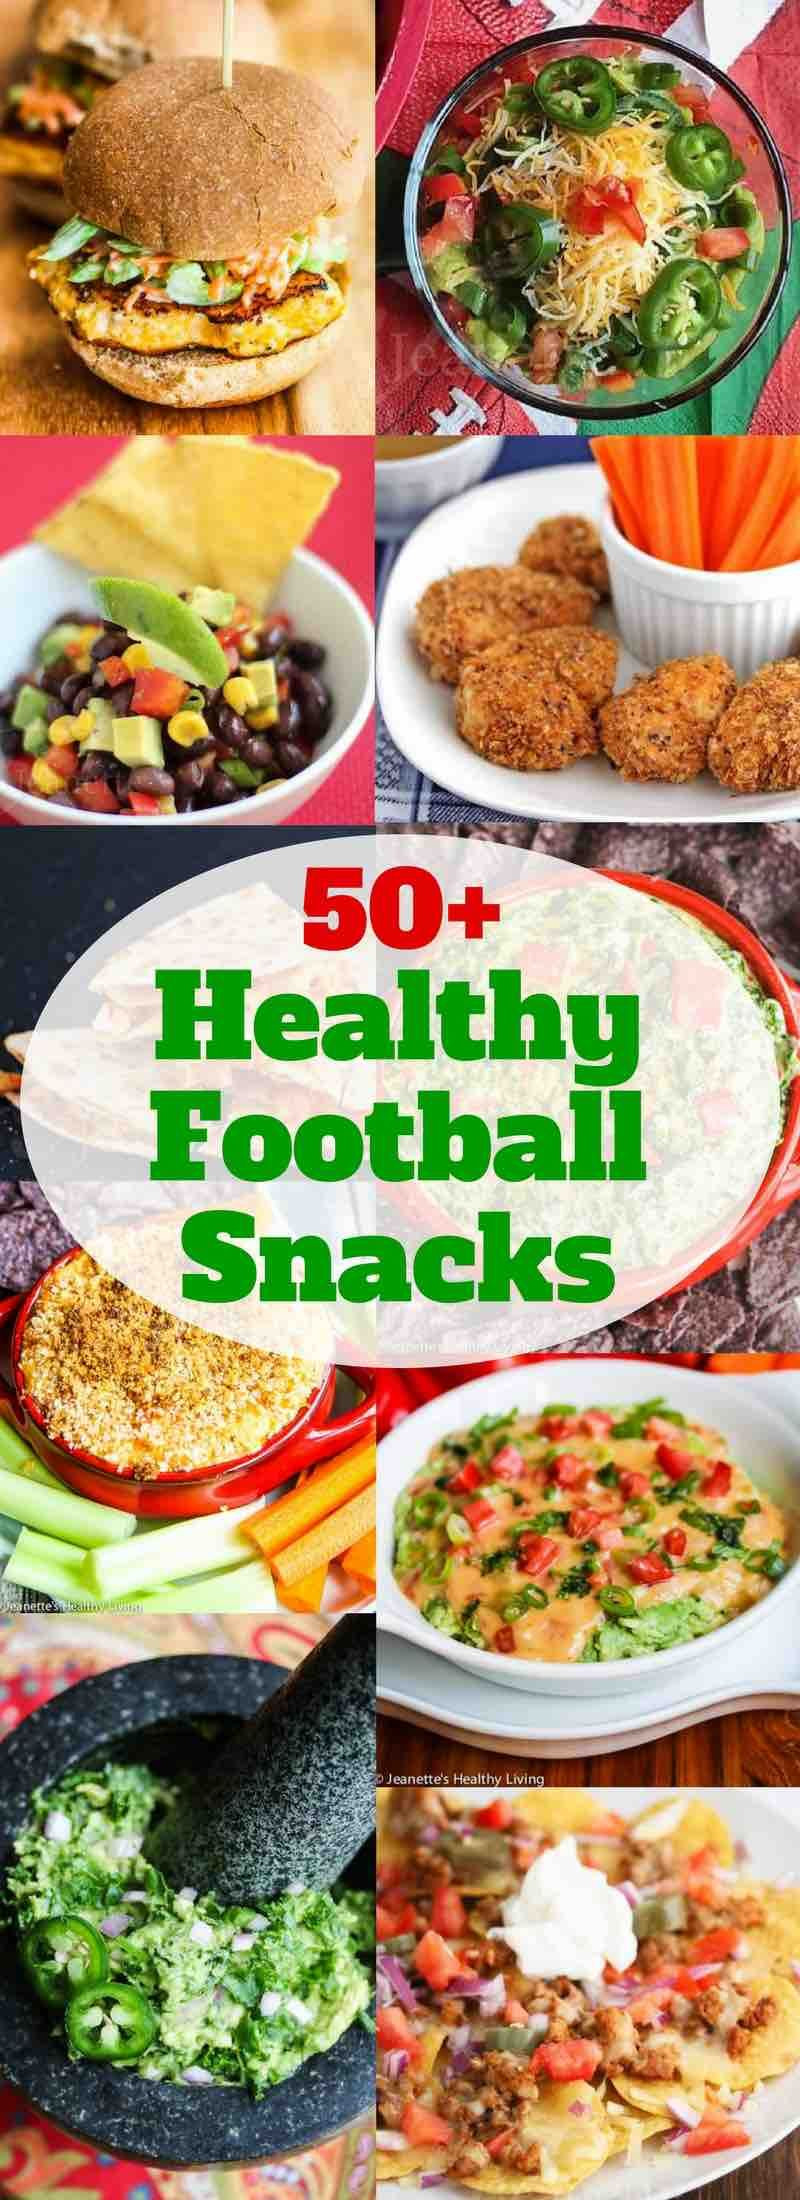 Healthy Recipes for Football Players